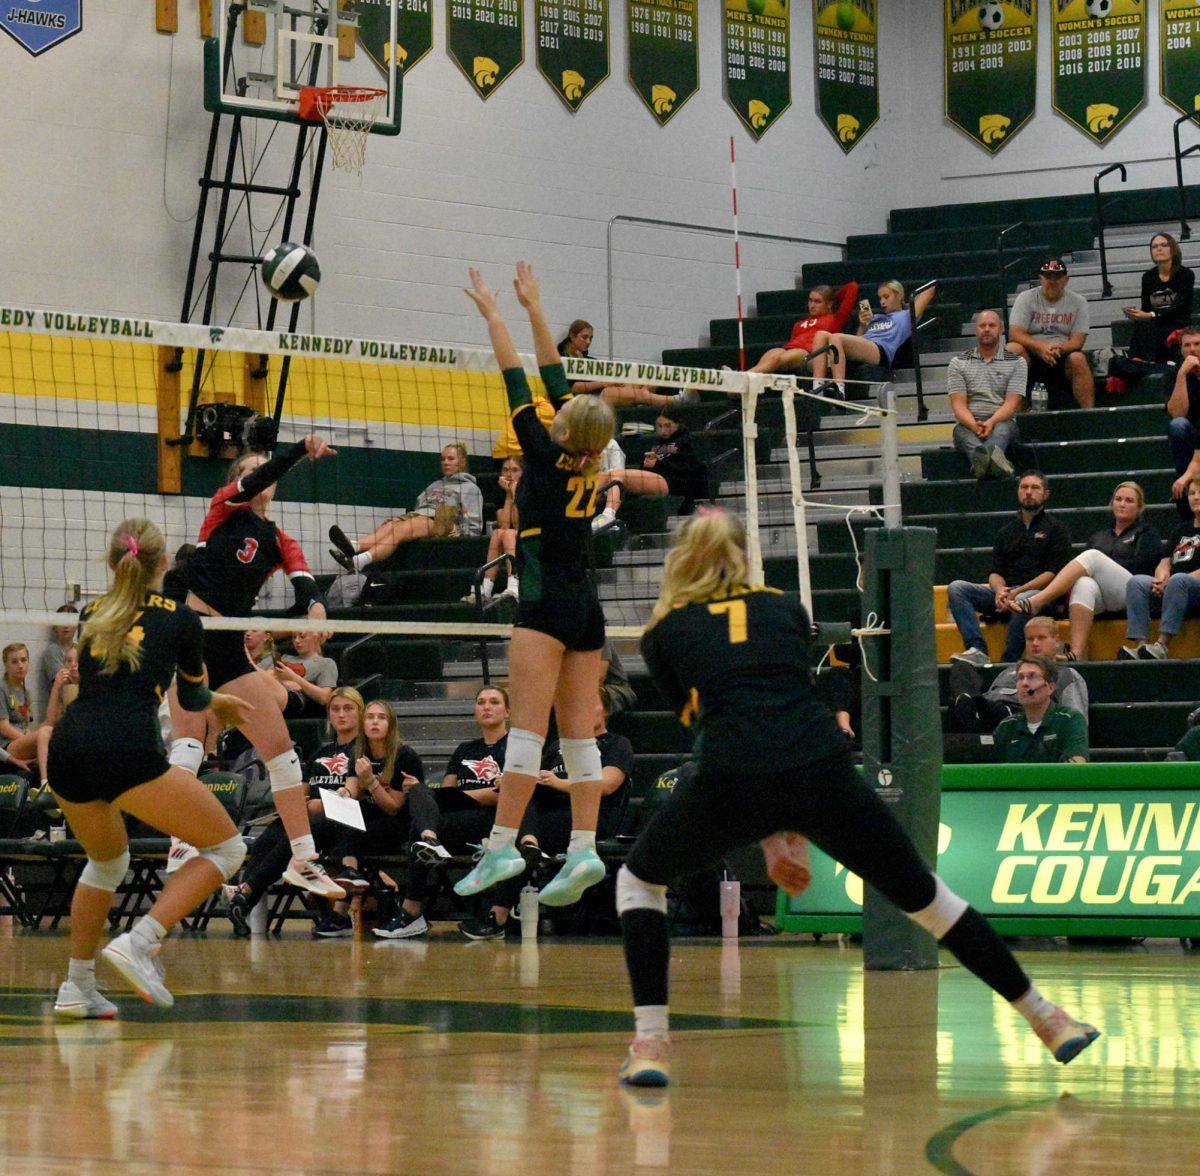 Varsity freshman Skyylan Ousley goes up for a block against Western Dubuque hitter.